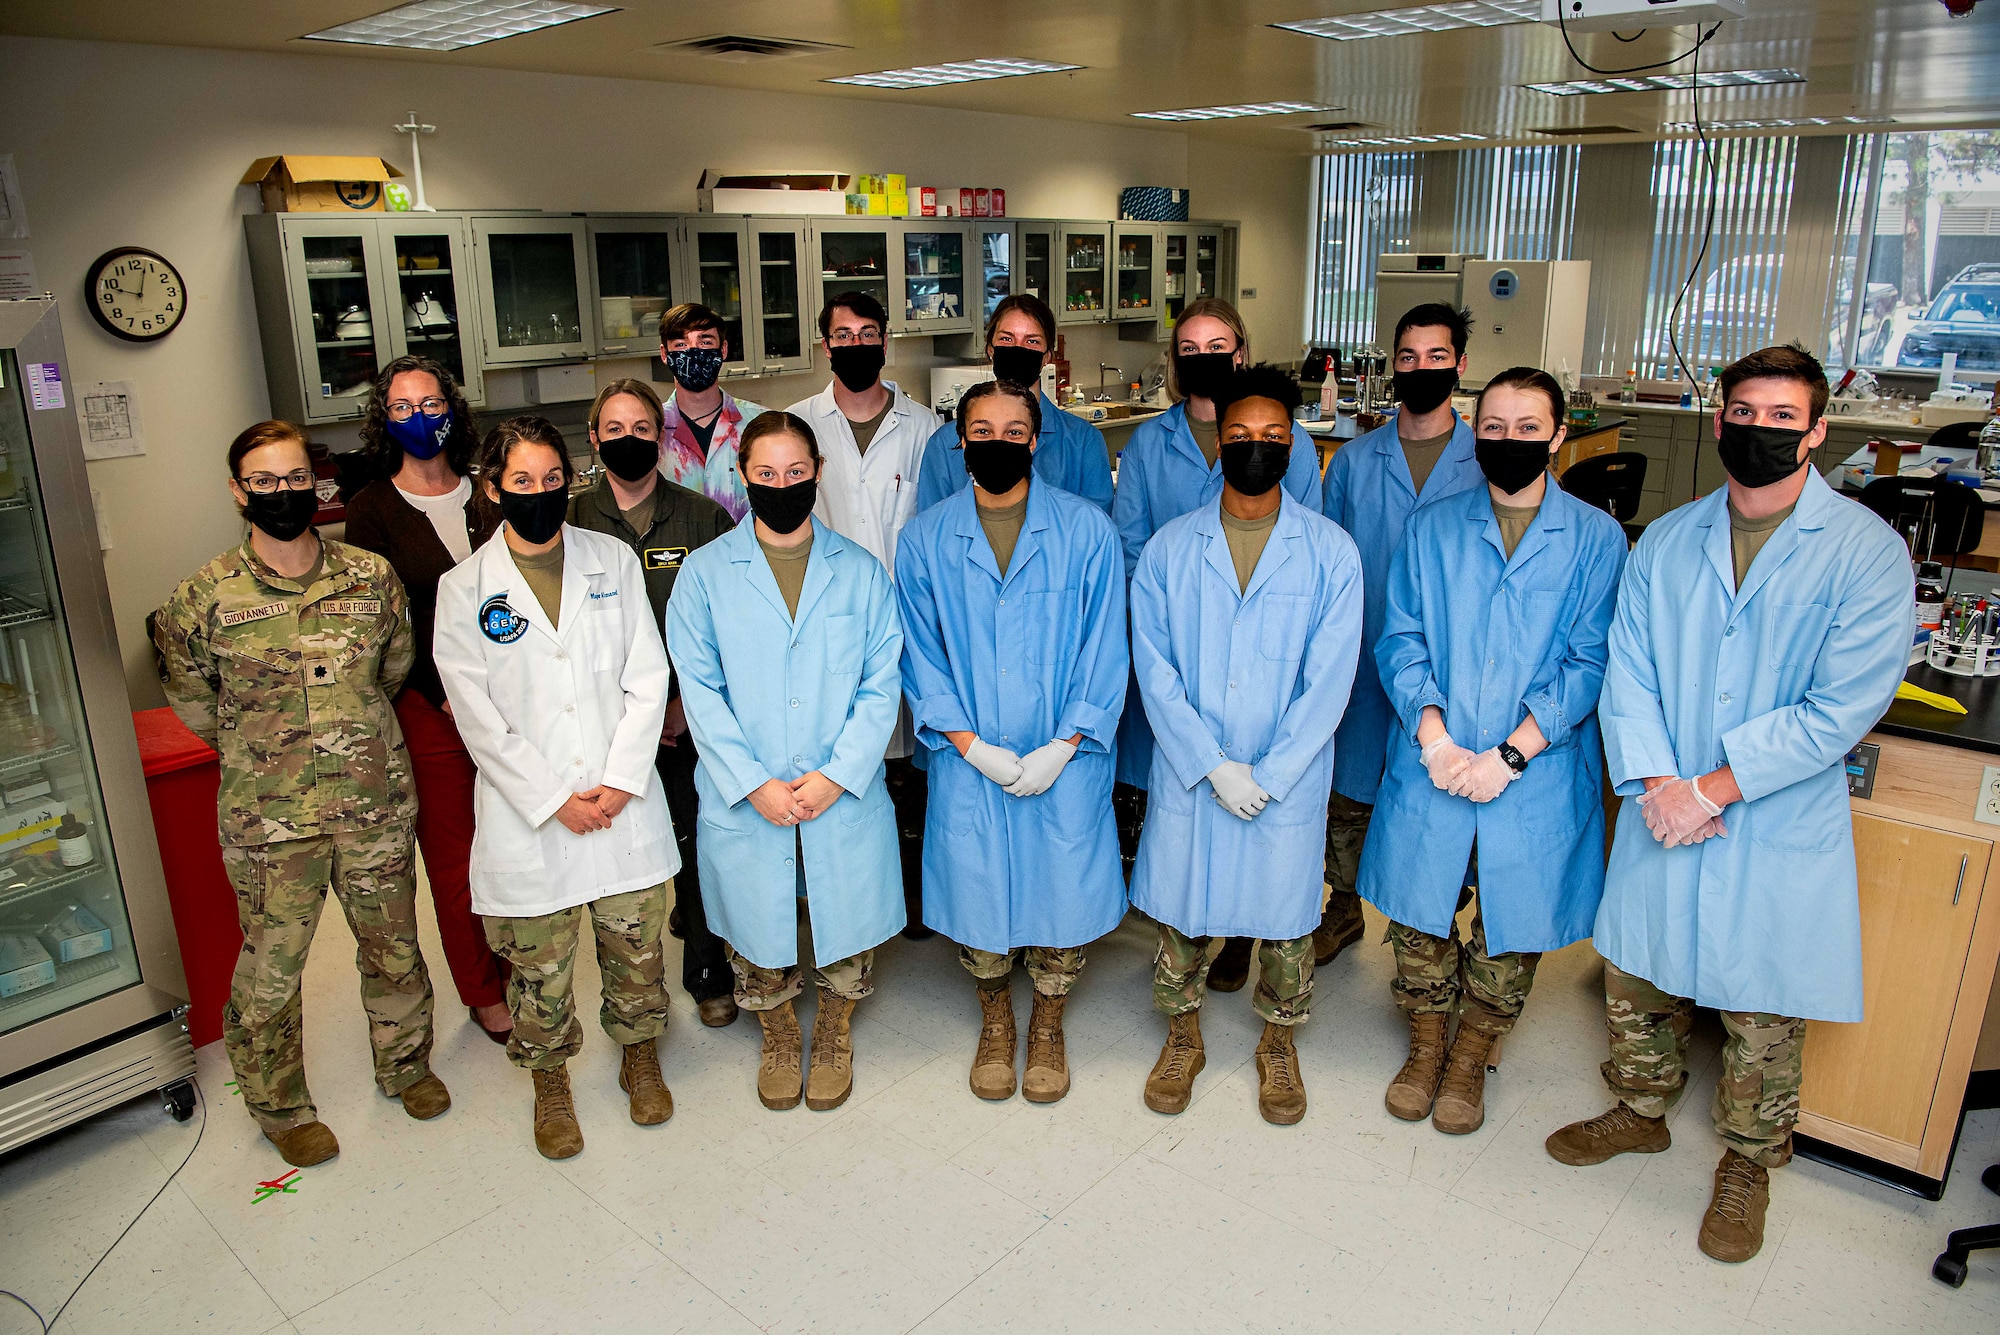 Maj. Erin Almand’s Edison Grant research team includes 10 United States Air Force Academy Cadets. “This is the first time they don’t feel like students,” she said. “They are scientists.” U.S. Air Force Academy -- (U.S. Air Force photo/Trevor Cokley)